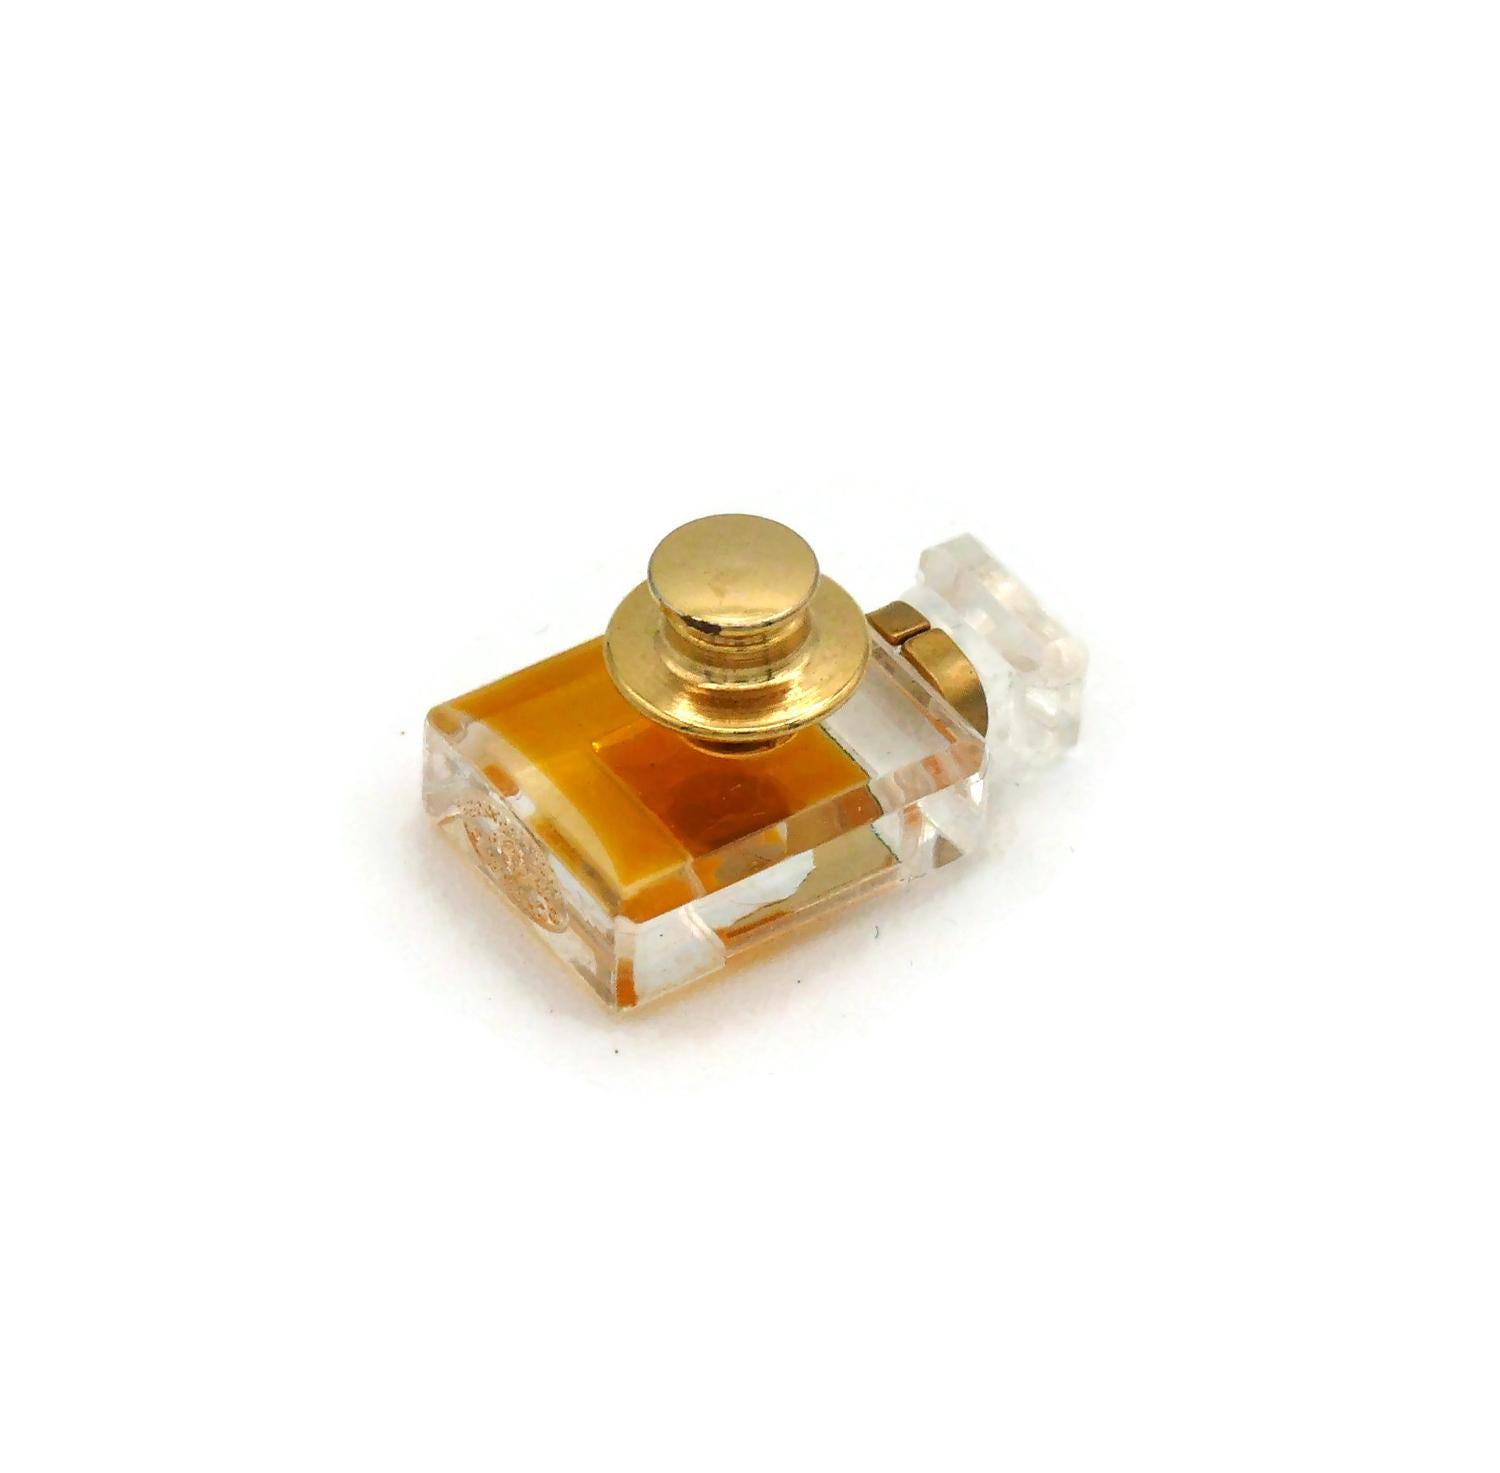 Women's or Men's CHANEL by KARL LAGERFELD Iconic No. 5 Perfume Bottle Pin Brooch, 2005 For Sale